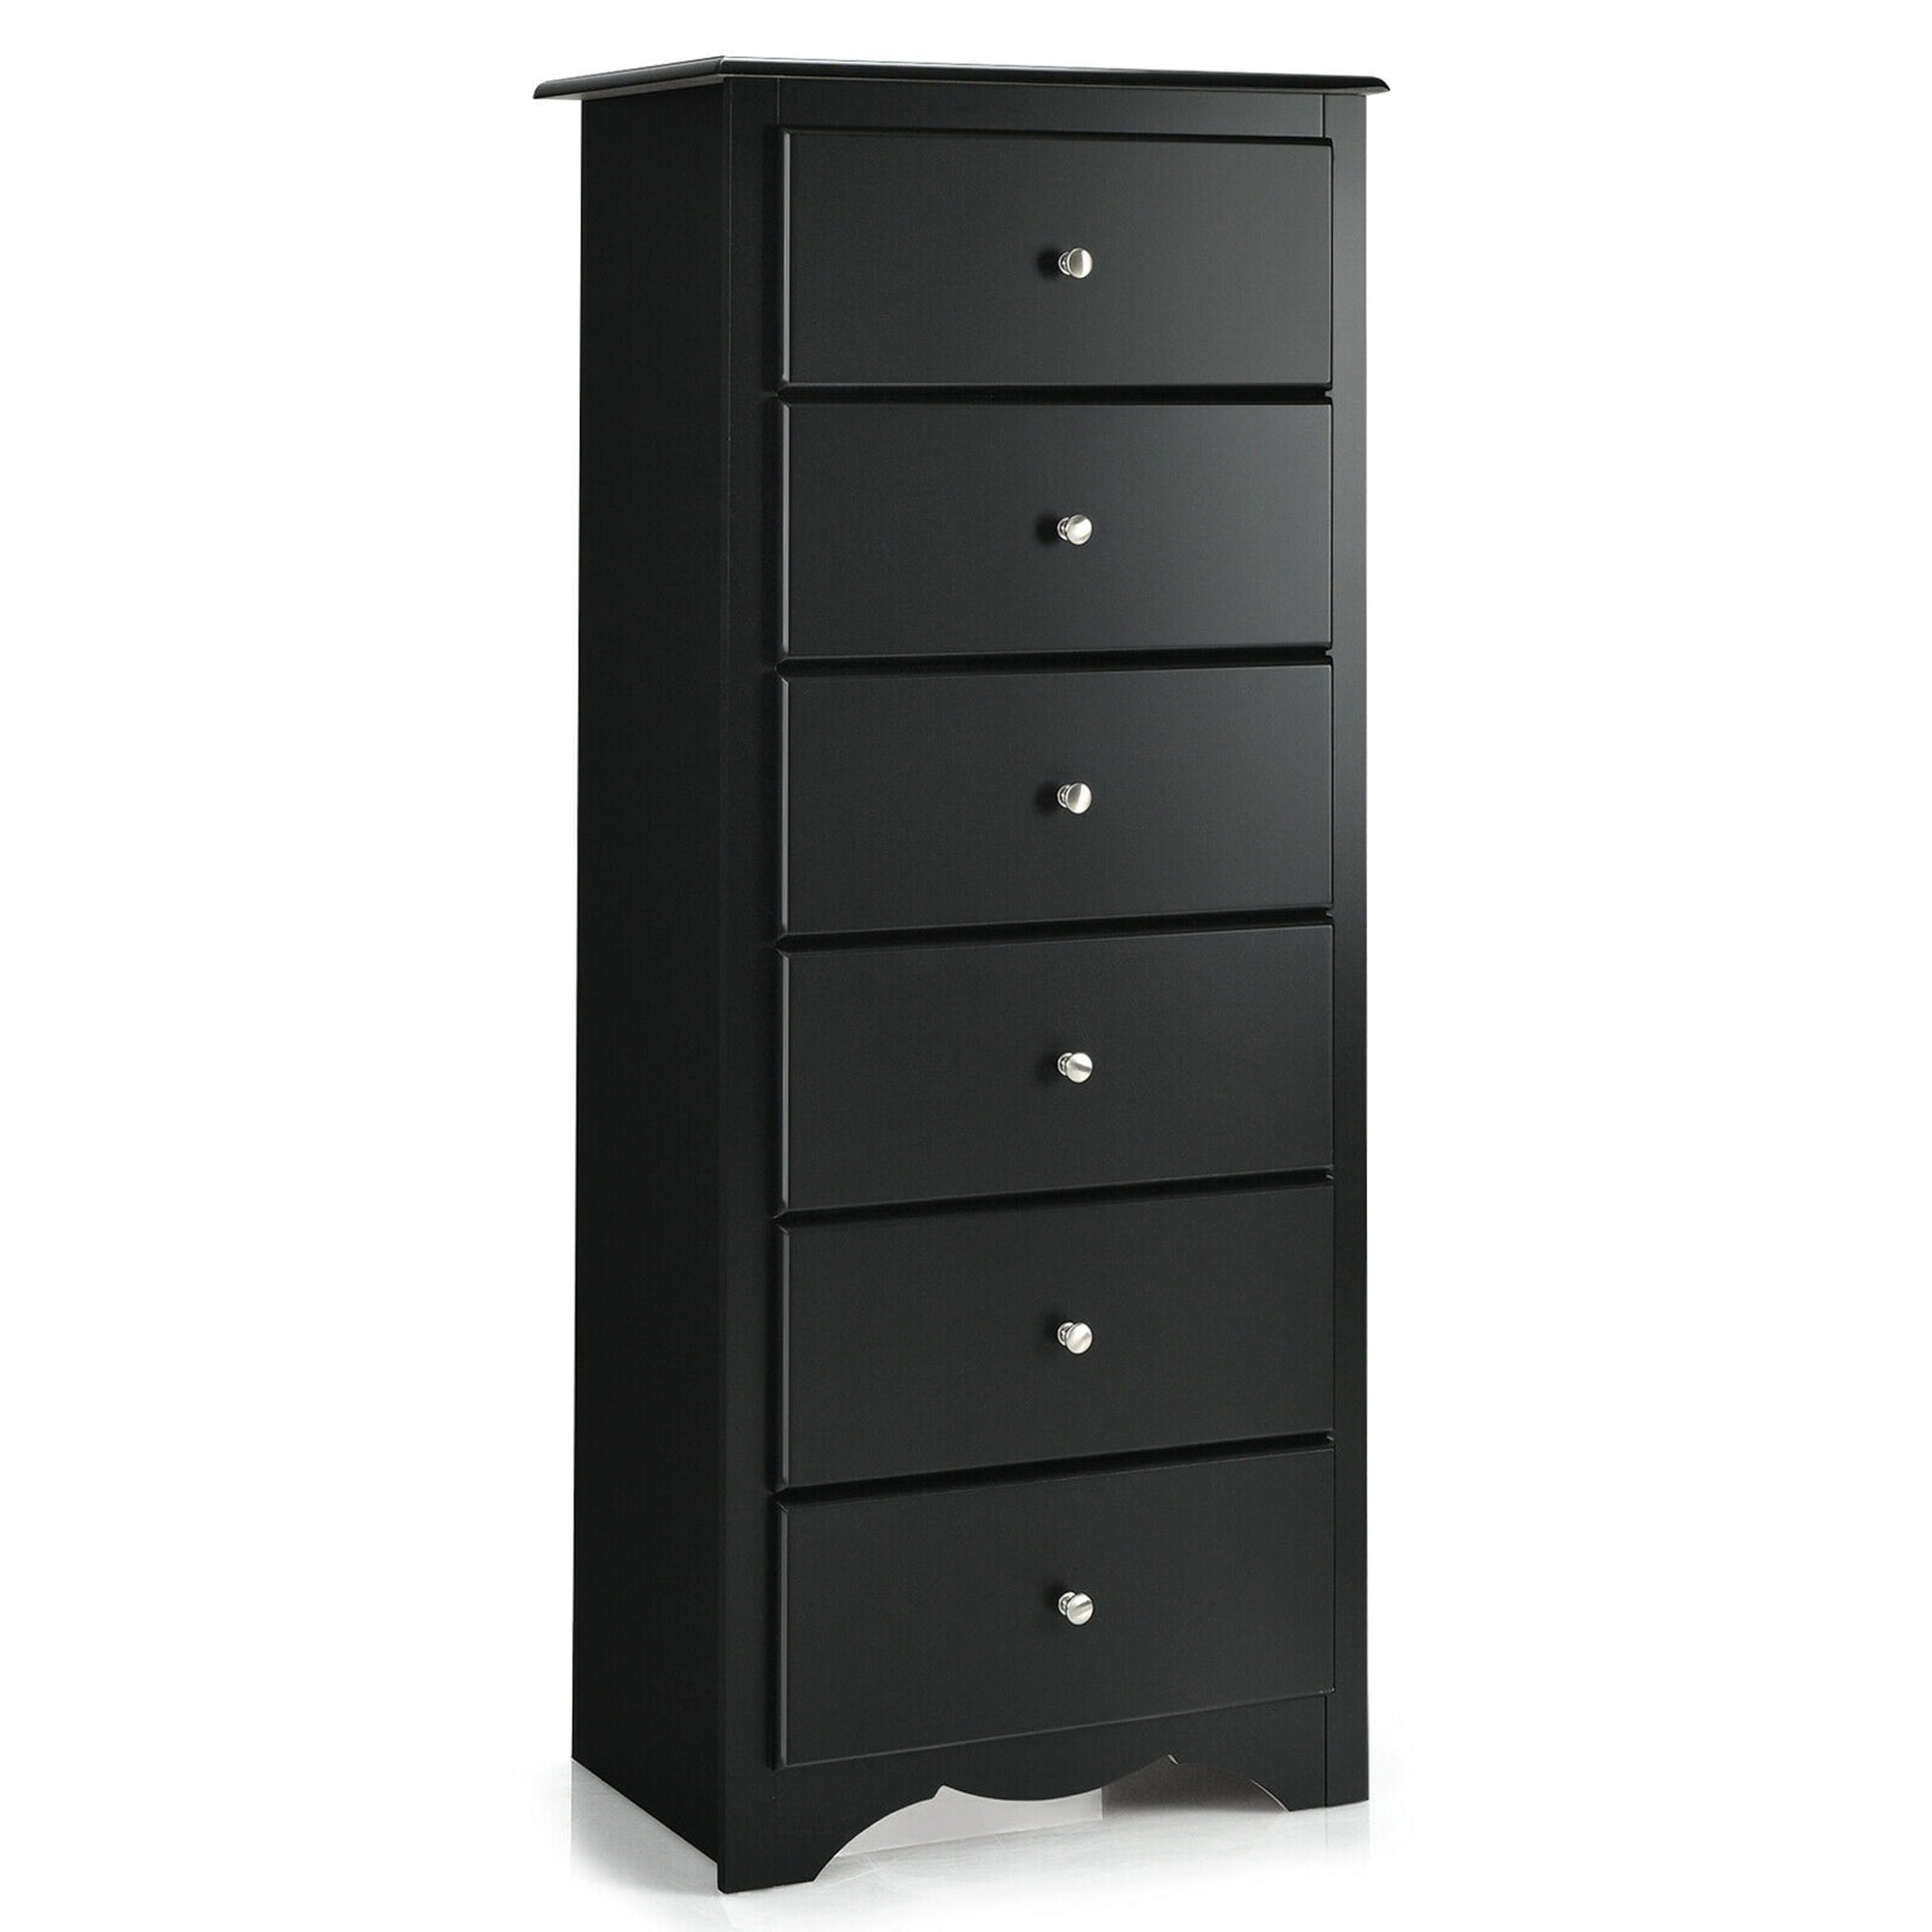 Details about   6Drawer Chest Dresser Clothes Storage Tall Furniture Cabinet Bedroom Home Colors 